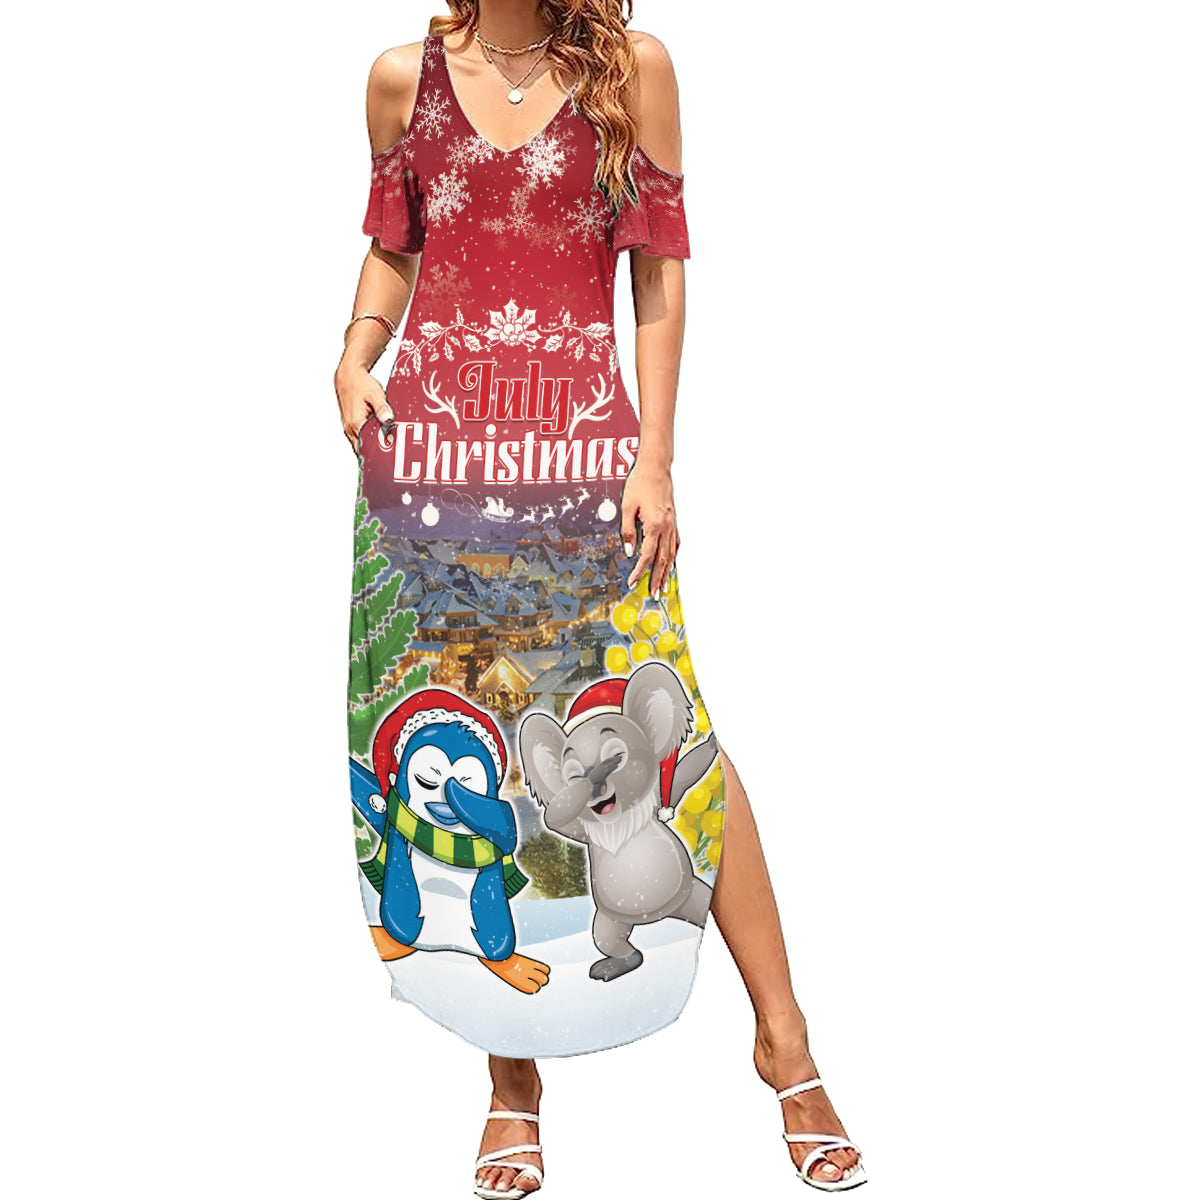 Personalised Christmas In July Summer Maxi Dress Funny Dabbing Dance Koala And Blue Penguins